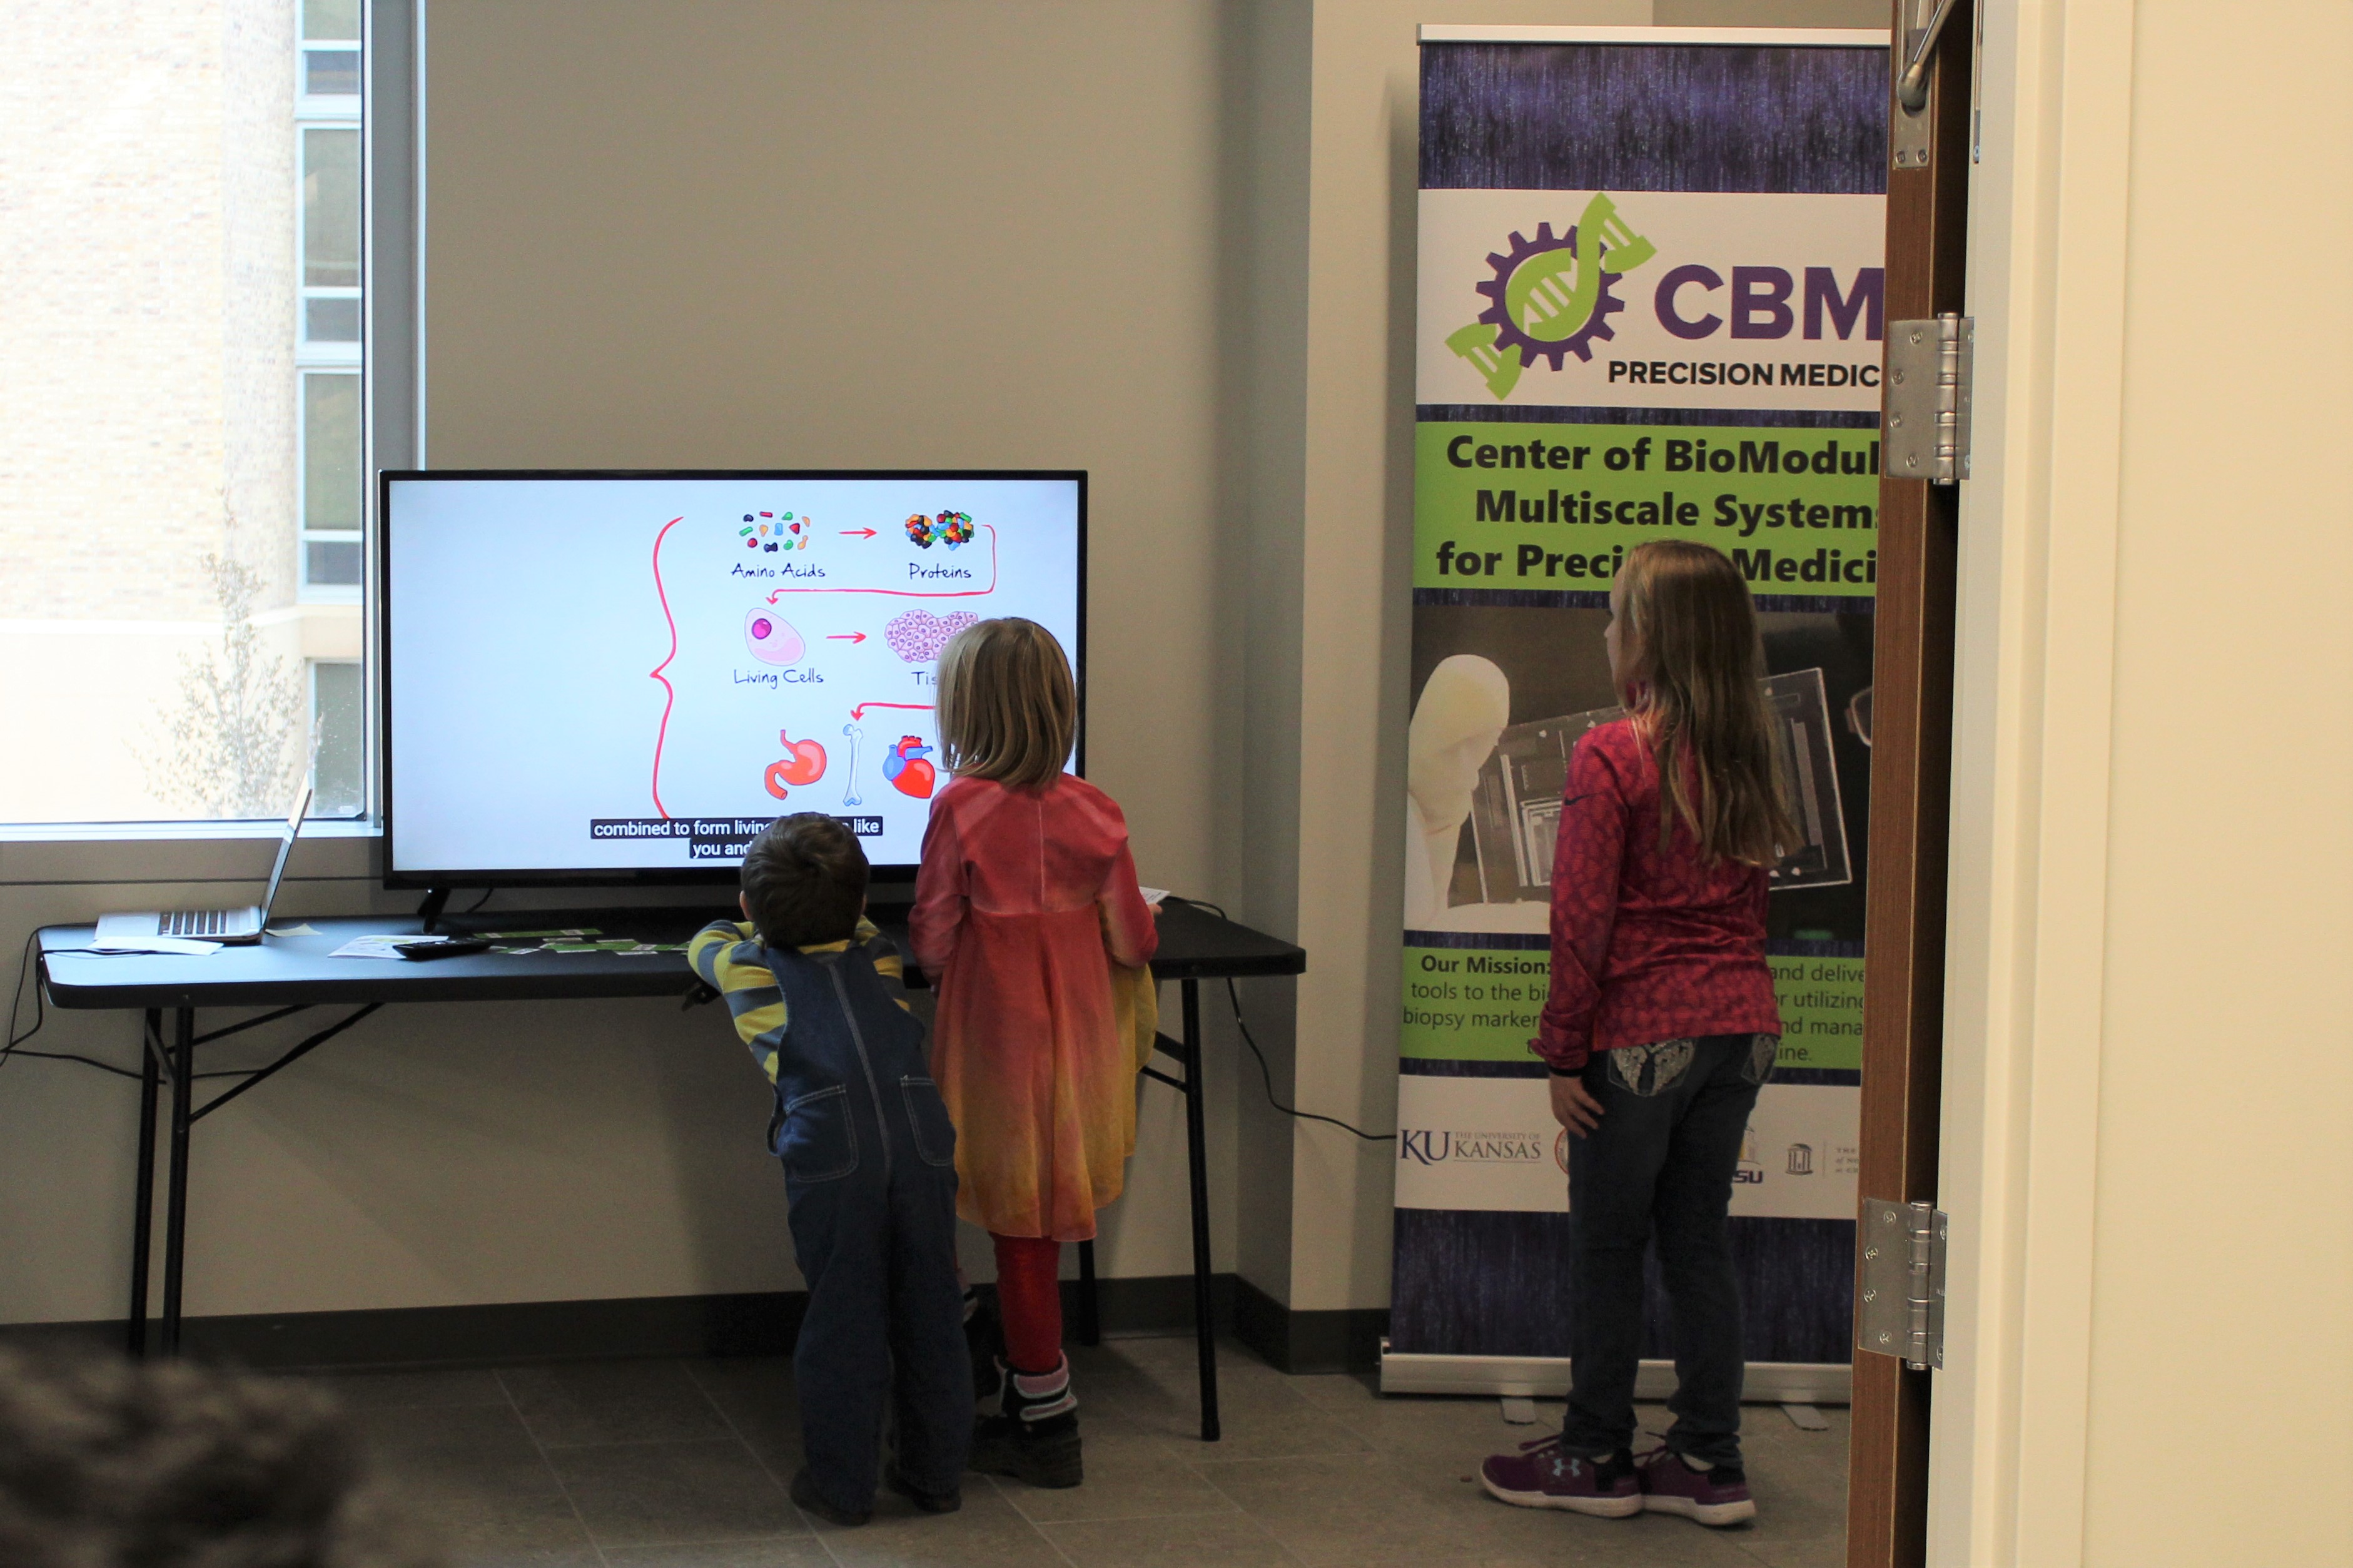 Three children watching chemistry demonstrations on a TV screen.